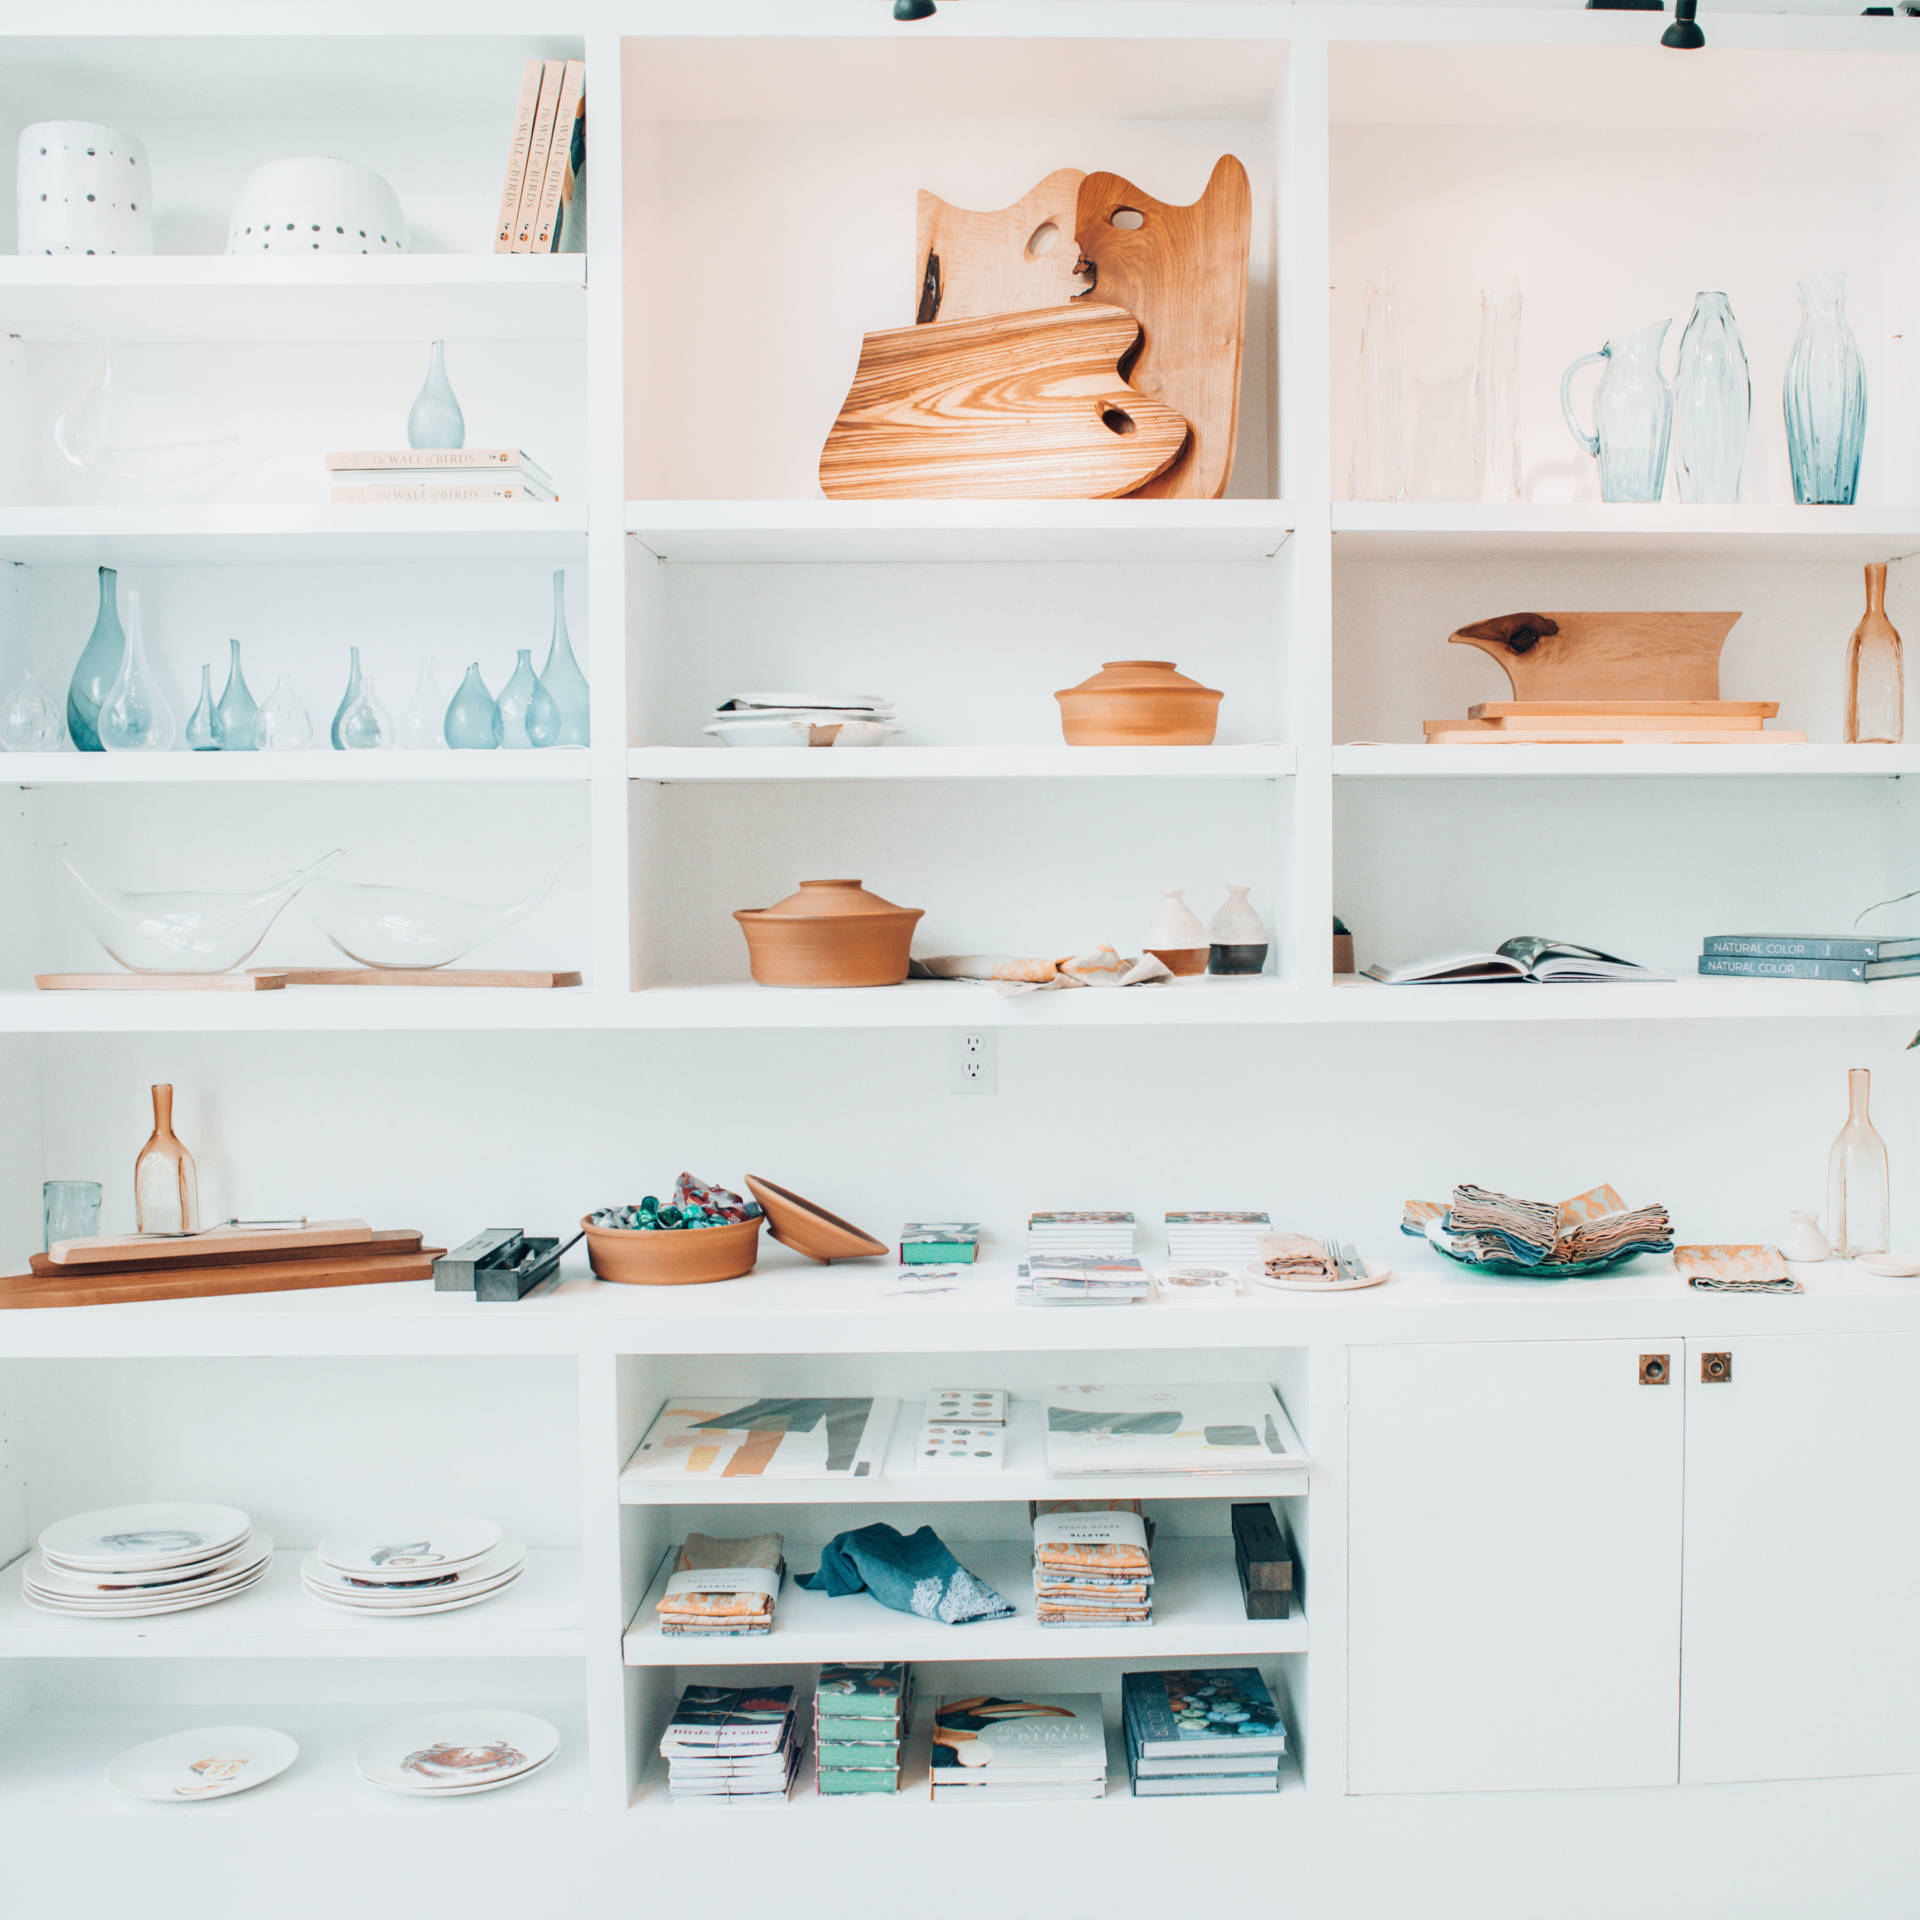 At Palette, there is a connected shop where you can buy different commissioned Bay Area pieces.